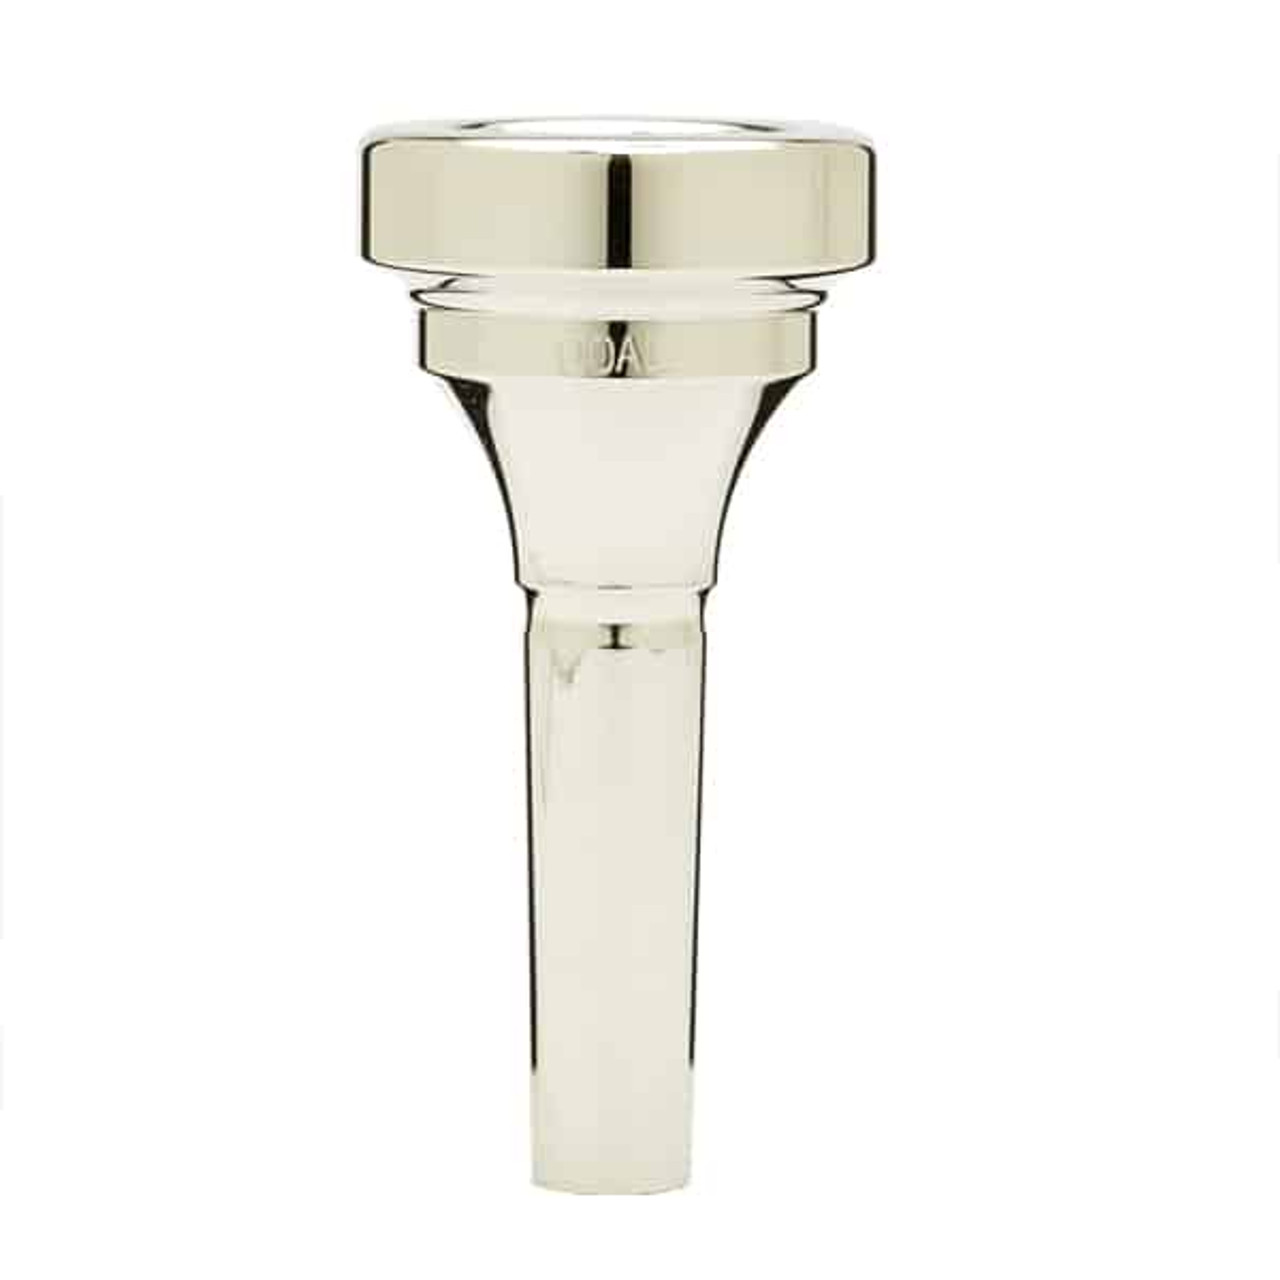 TROMBONE/EUPHONIUM Mouthpiece Holder With Initials, Mouthpiece